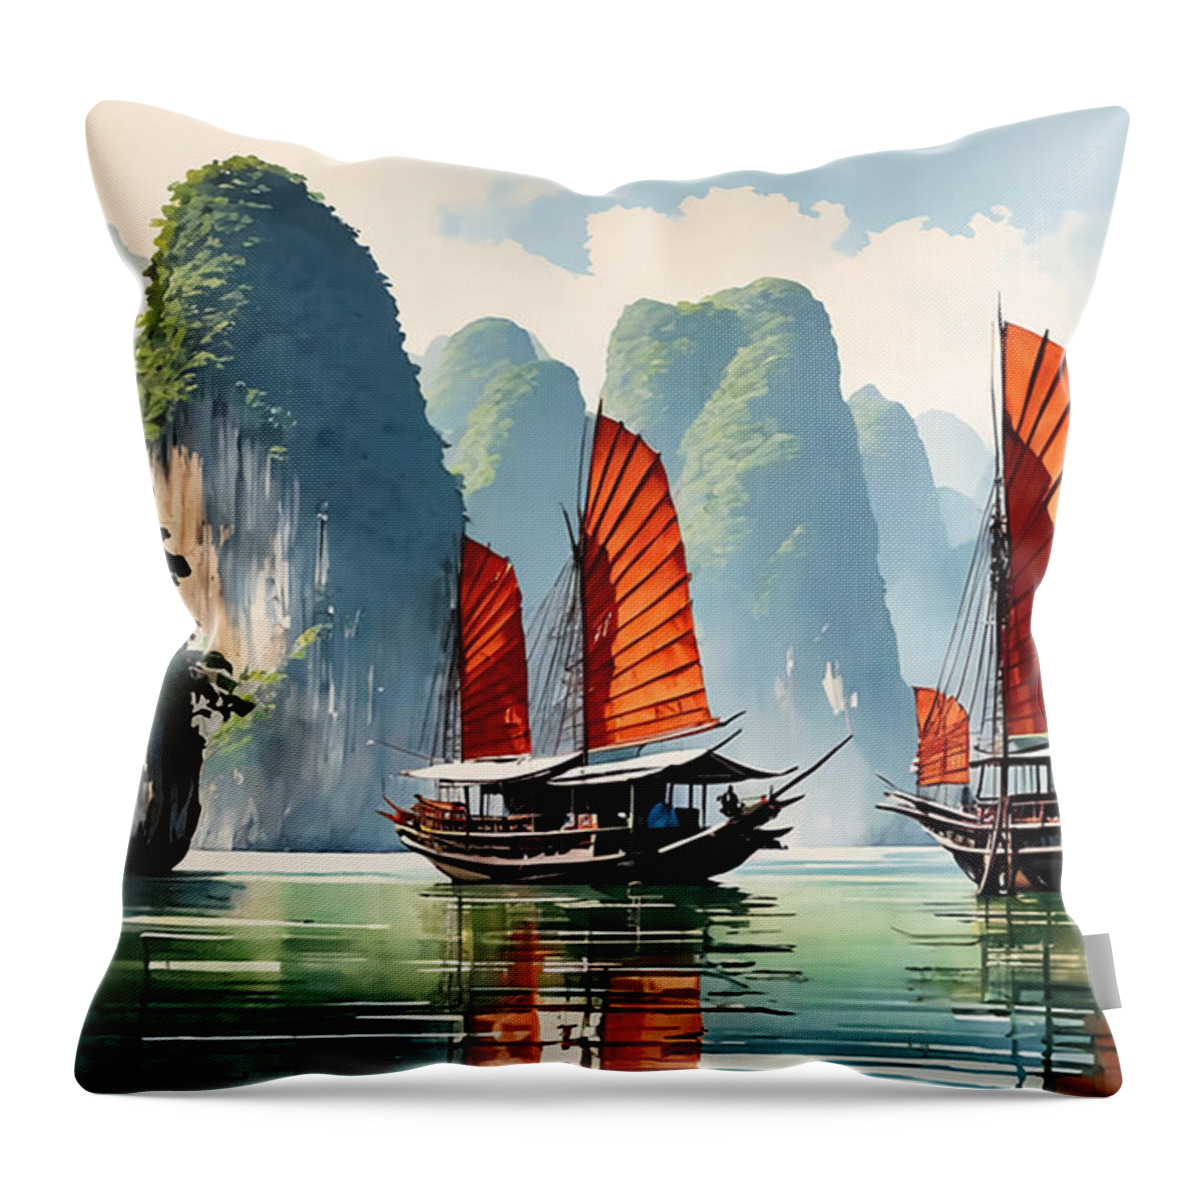 Vietnam Throw Pillow featuring the digital art Watercolor Halong Bay by Manjik Pictures